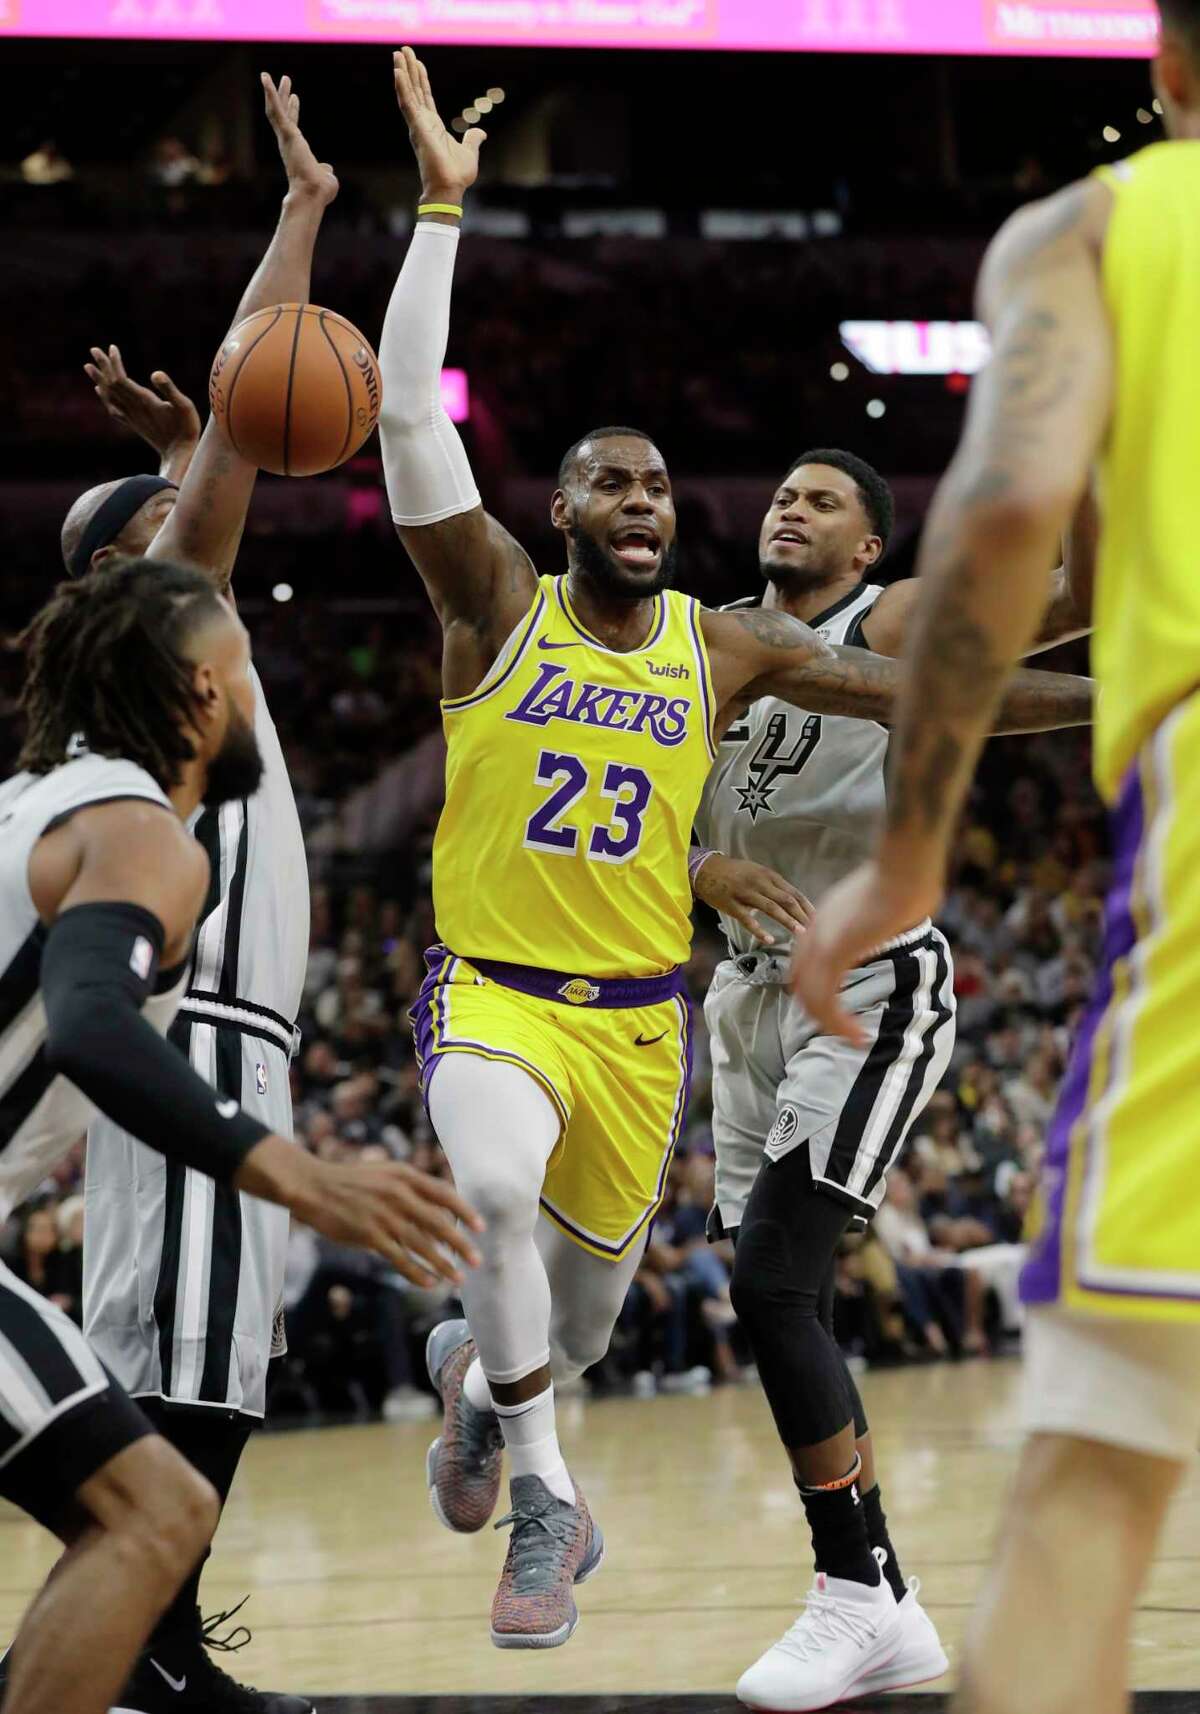 Los Angeles Lakers forward LeBron James (23) is fouled as he drives to the basket against the San Antonio Spurs during the first half of an NBA basketball game, Saturday, Oct. 27, 2018, in San Antonio. (AP Photo/Eric Gay)